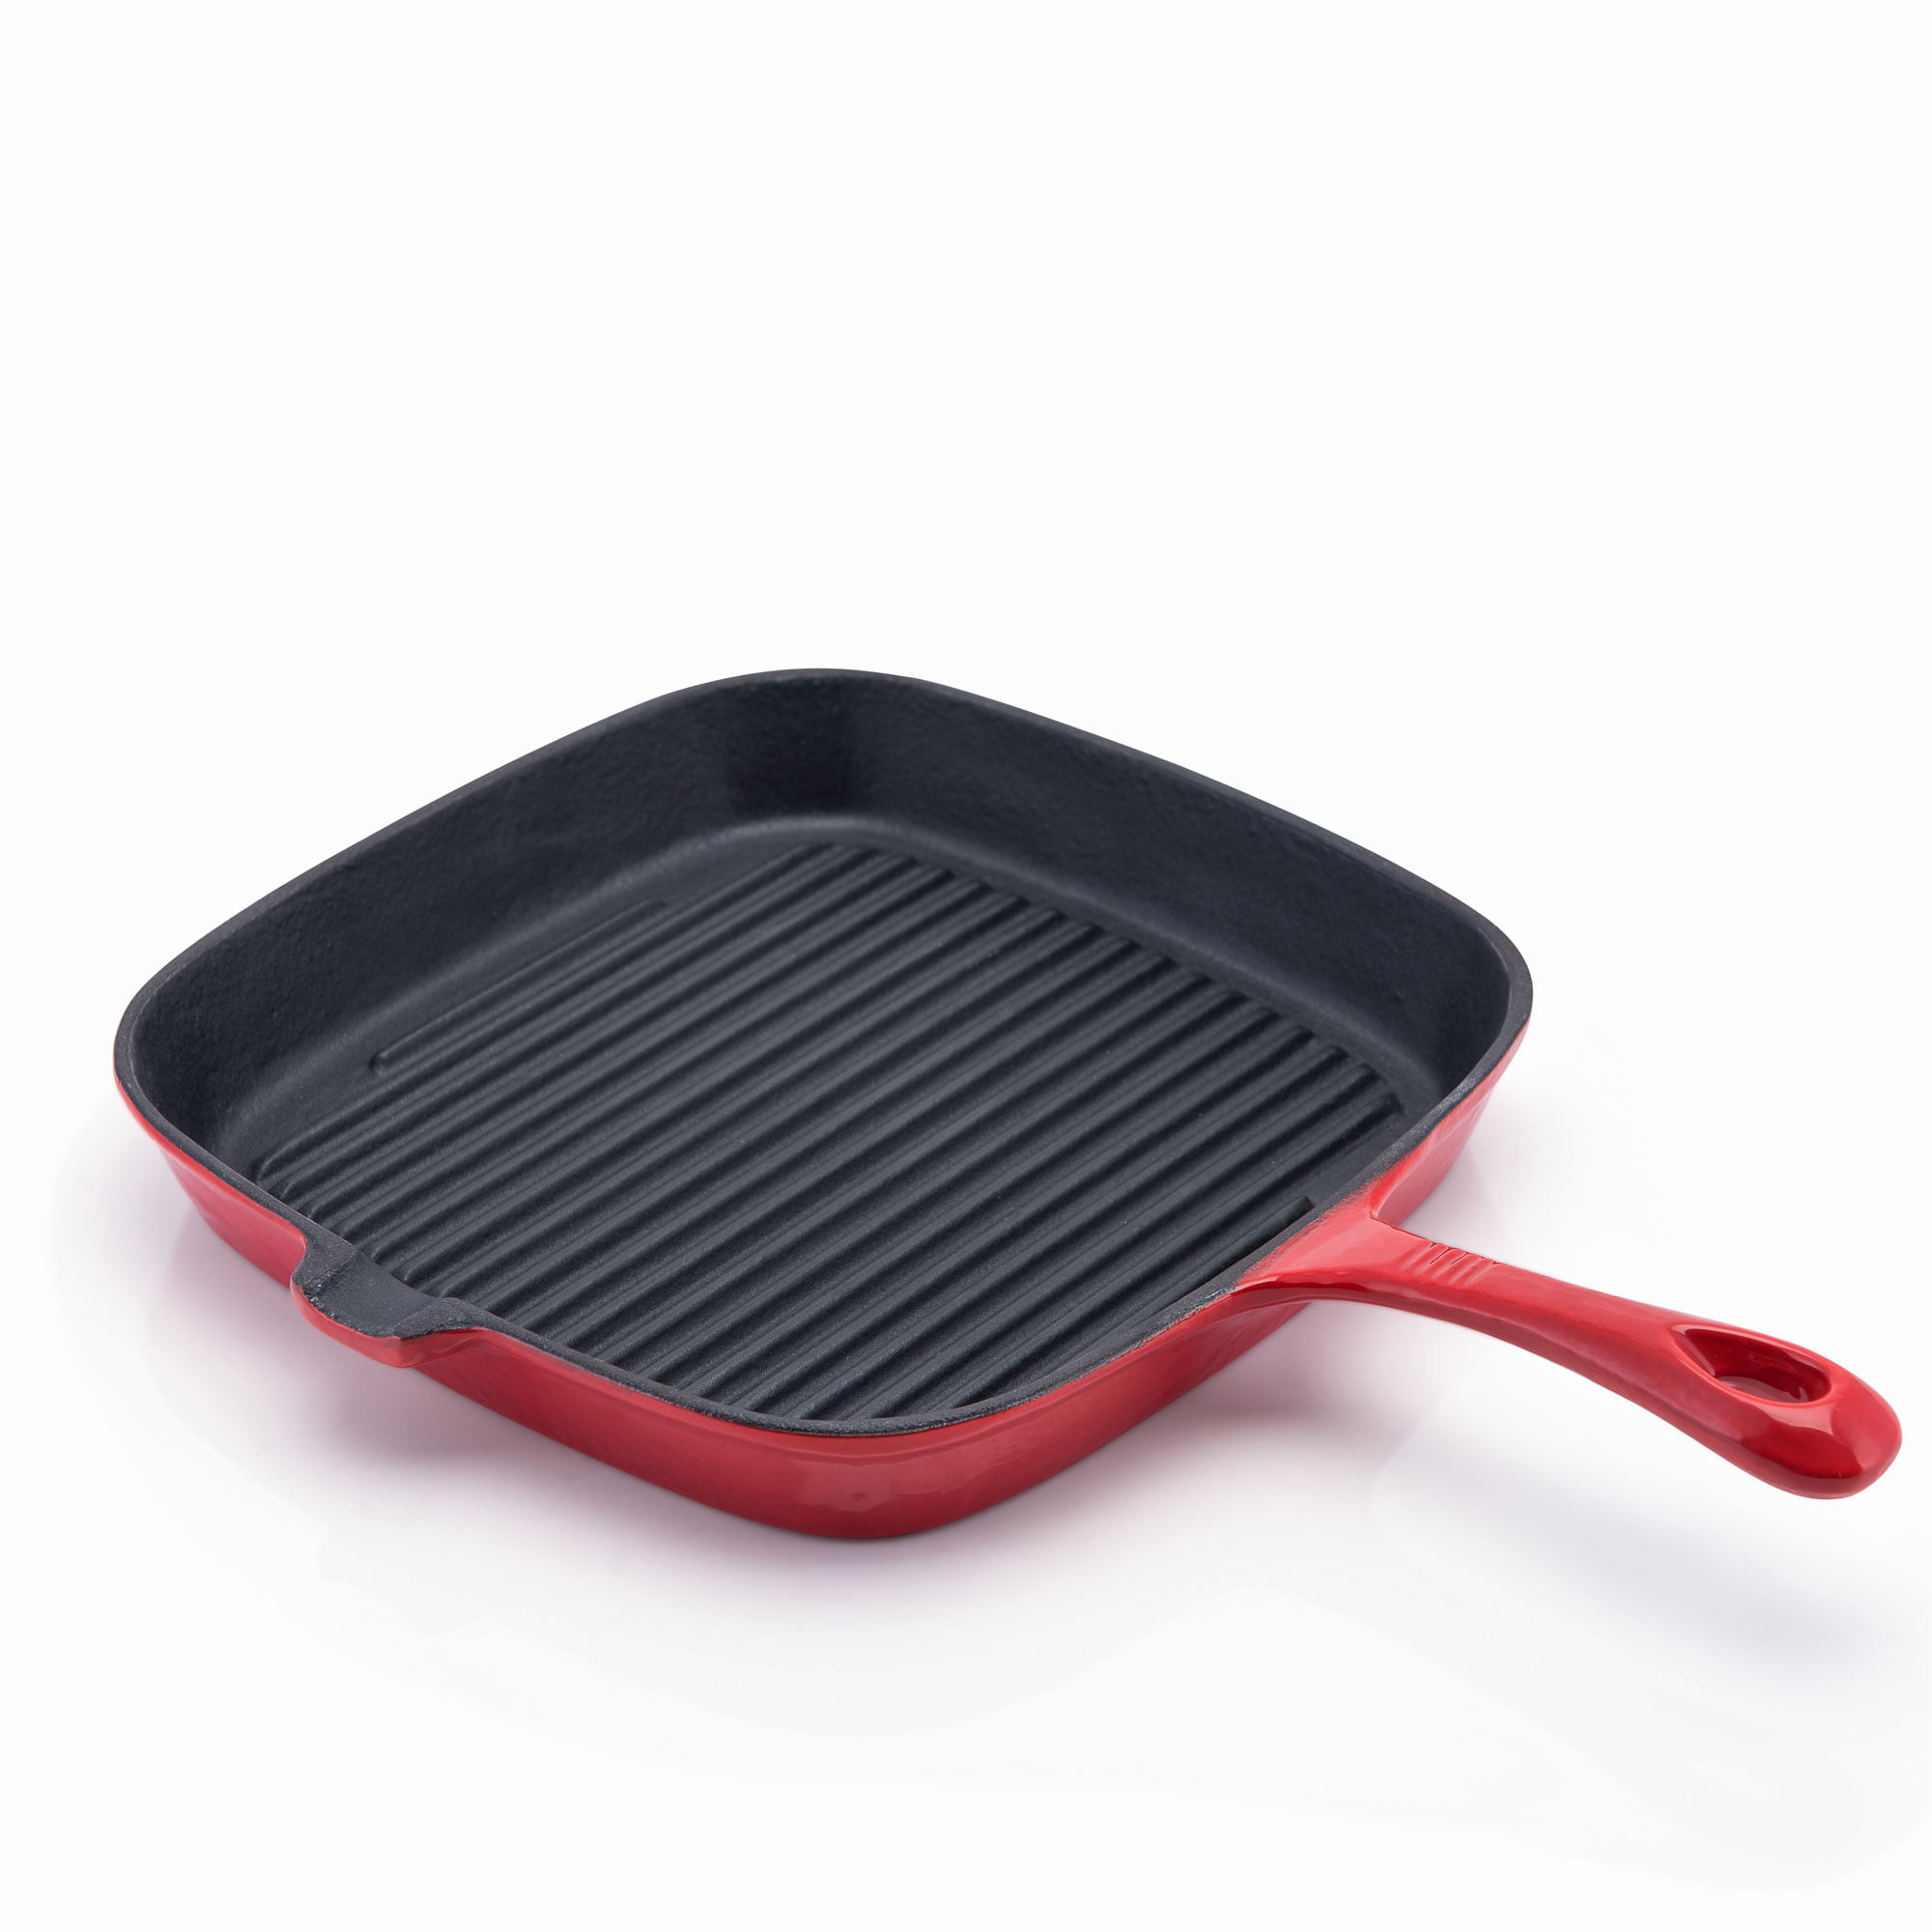 11 Inch Square Enamel Cast Iron Grill Pan with Matching Grill Press in Red  with Press - Bed Bath & Beyond - 33419010